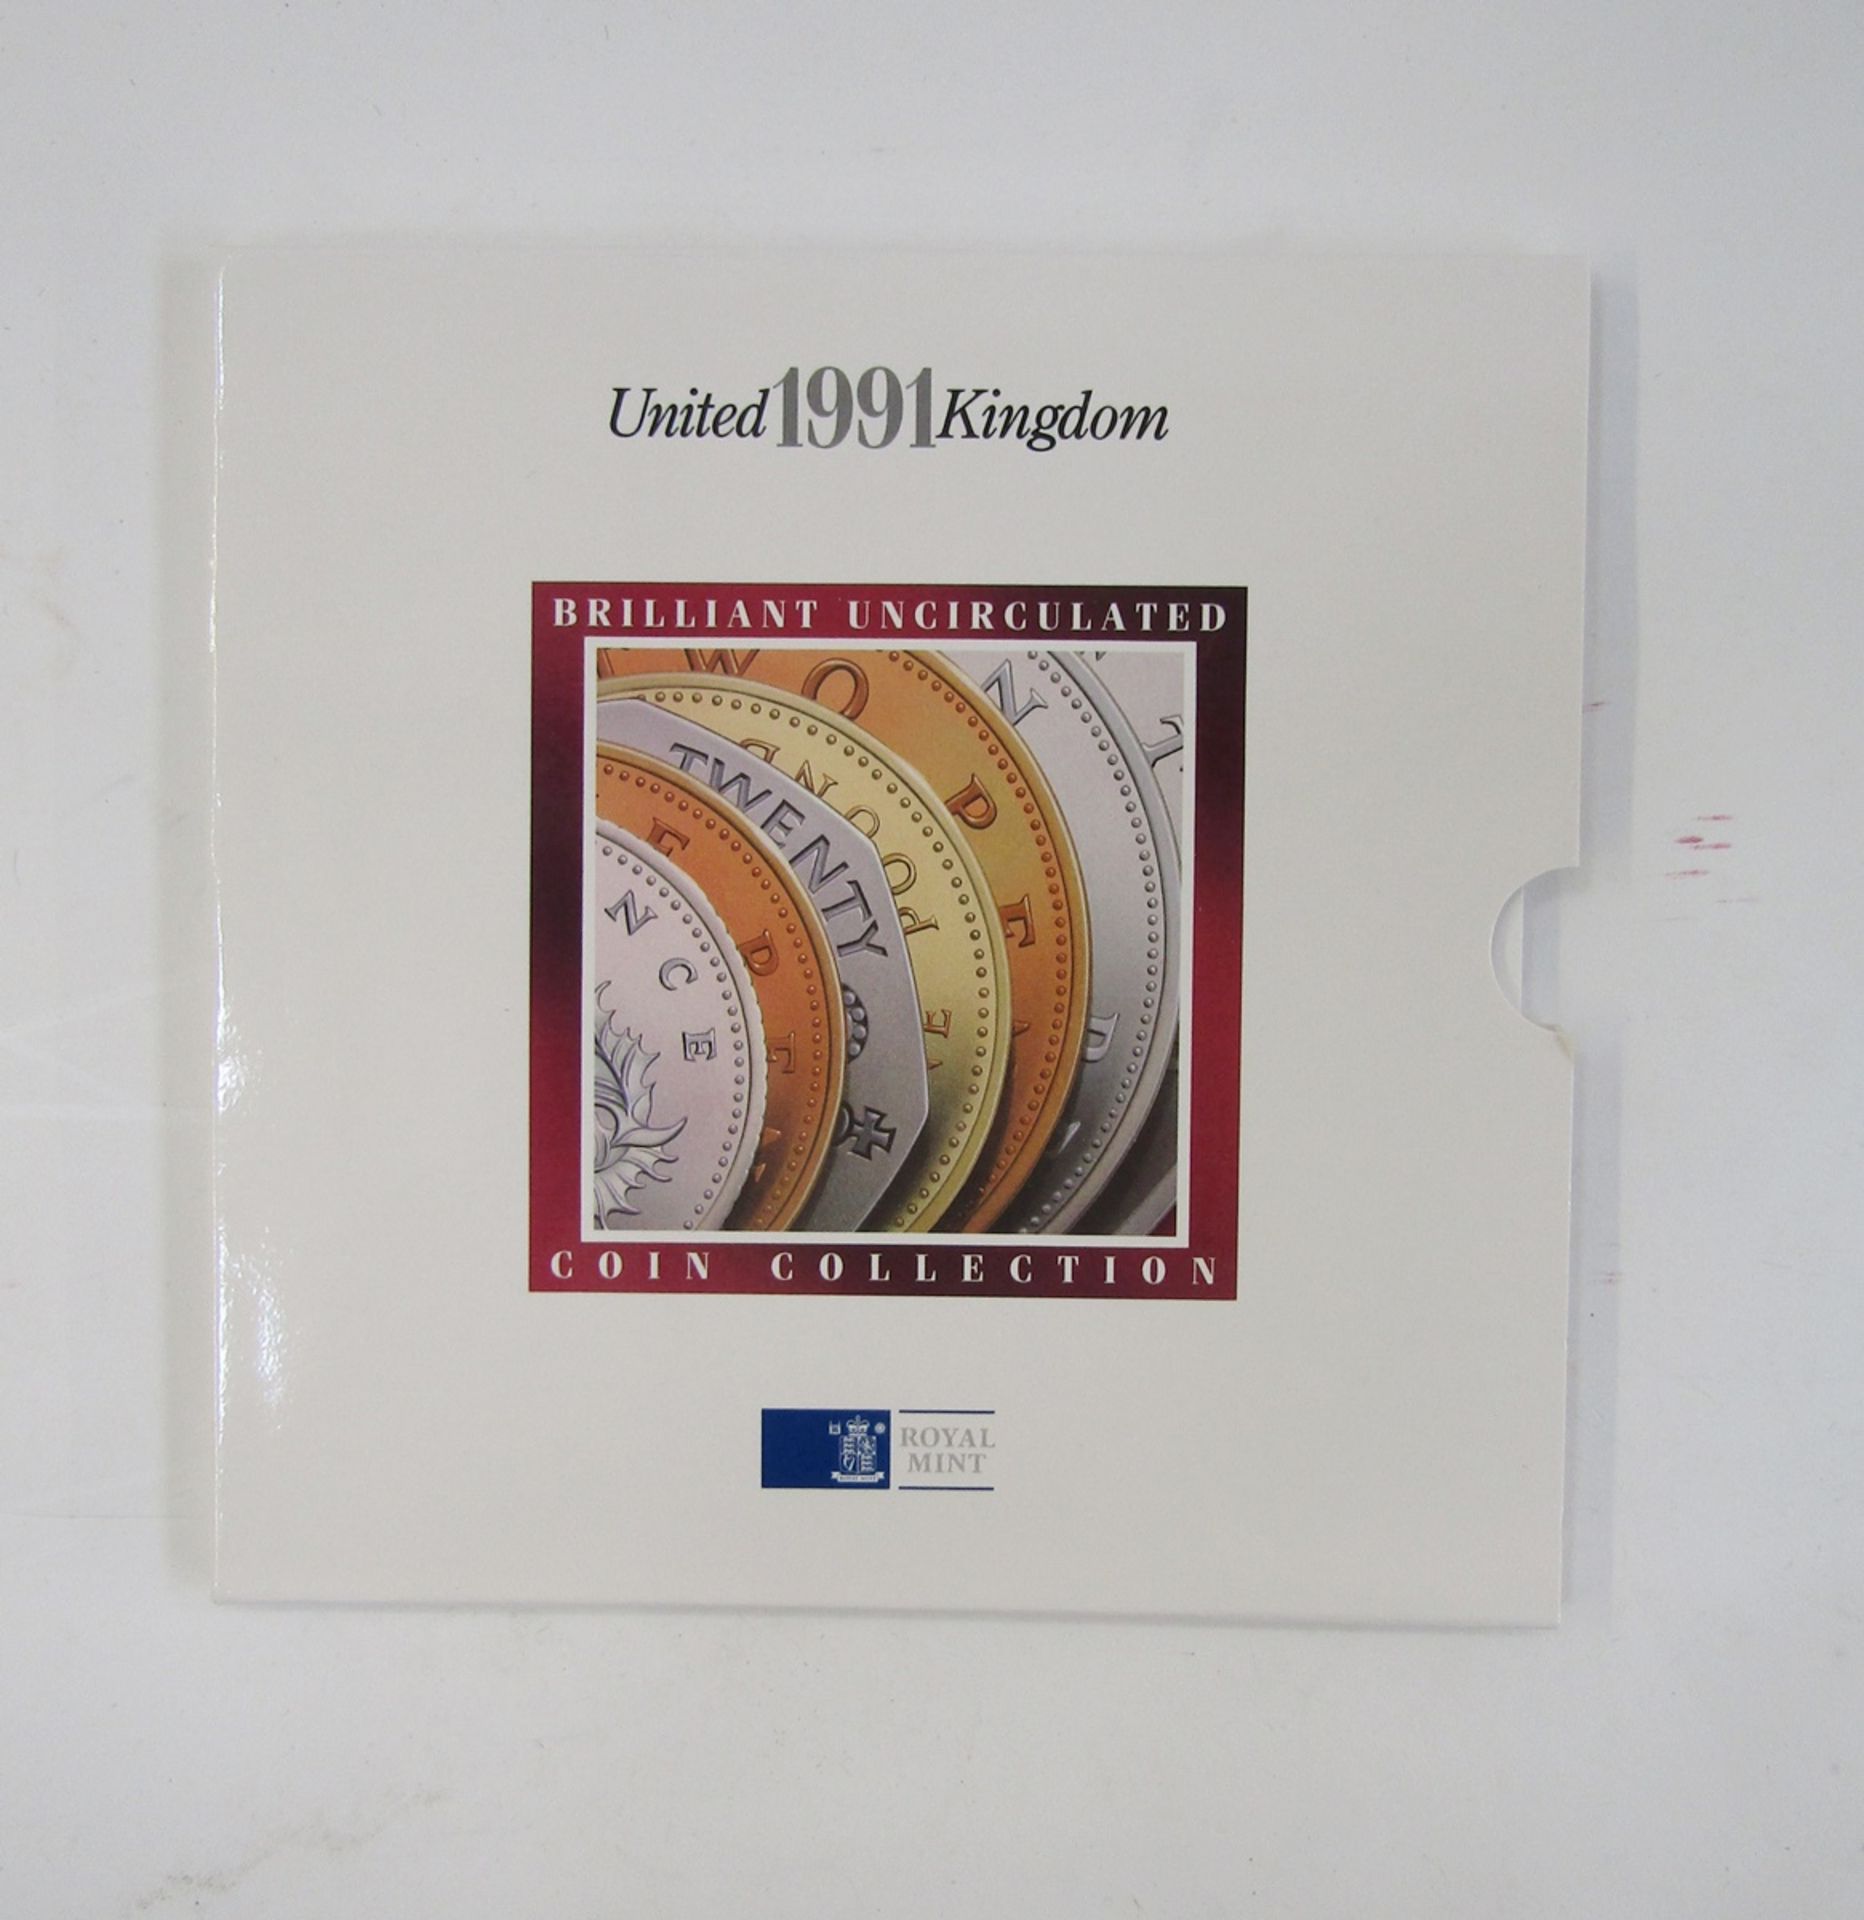 Collection of brilliant uncirculated coin sets (12), 1982 x 2, 1983 x 3, 1984 x 3, 1985, 1988, 1989, - Image 13 of 14